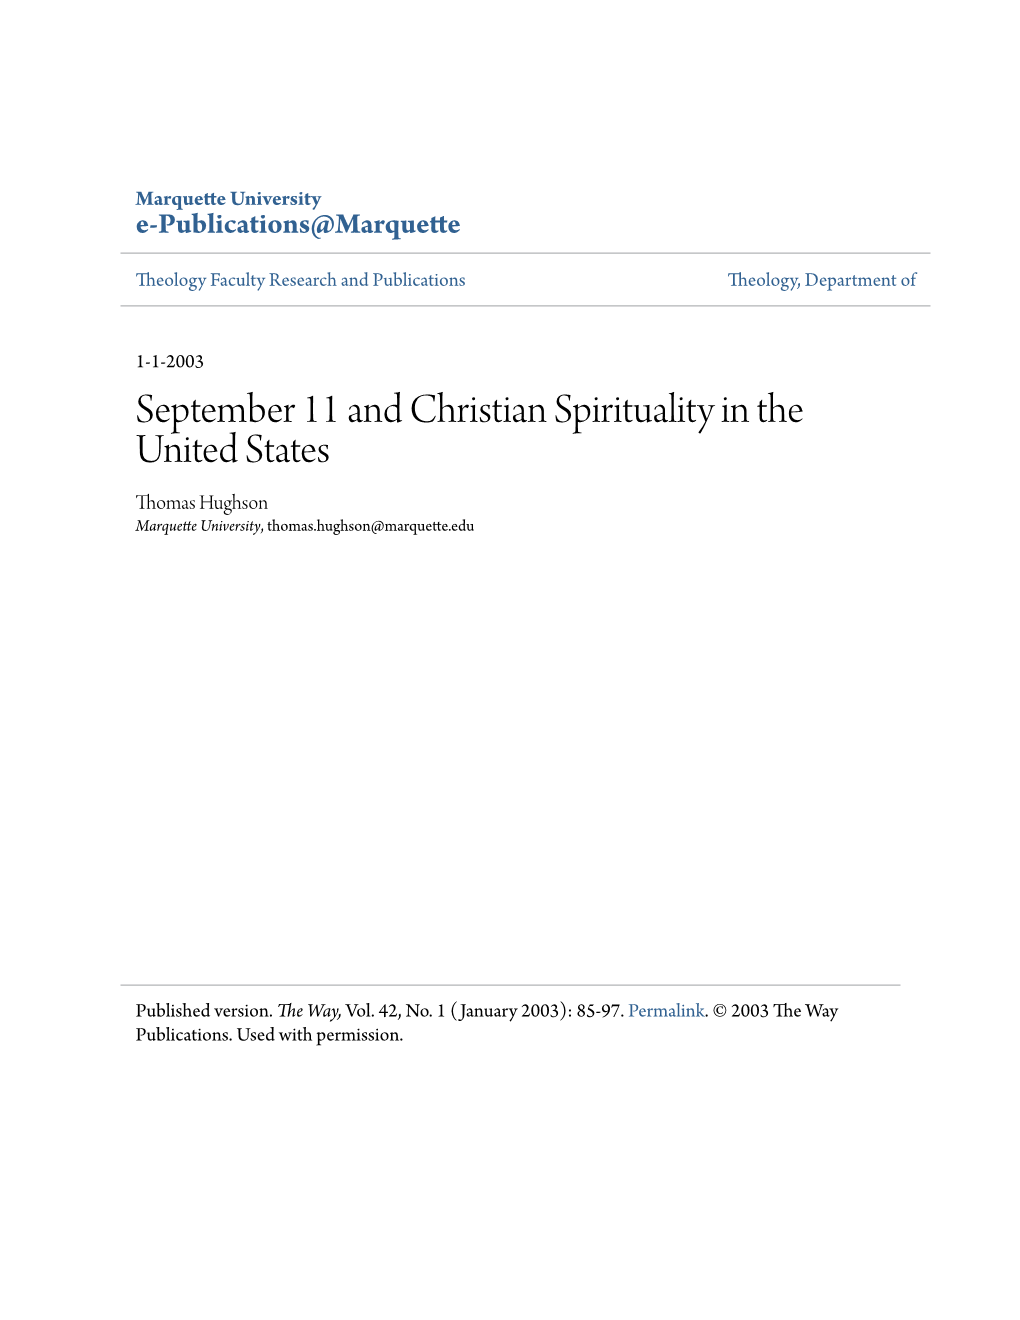 September 11 and Christian Spirituality in the United States Thomas Hughson Marquette University, Thomas.Hughson@Marquette.Edu